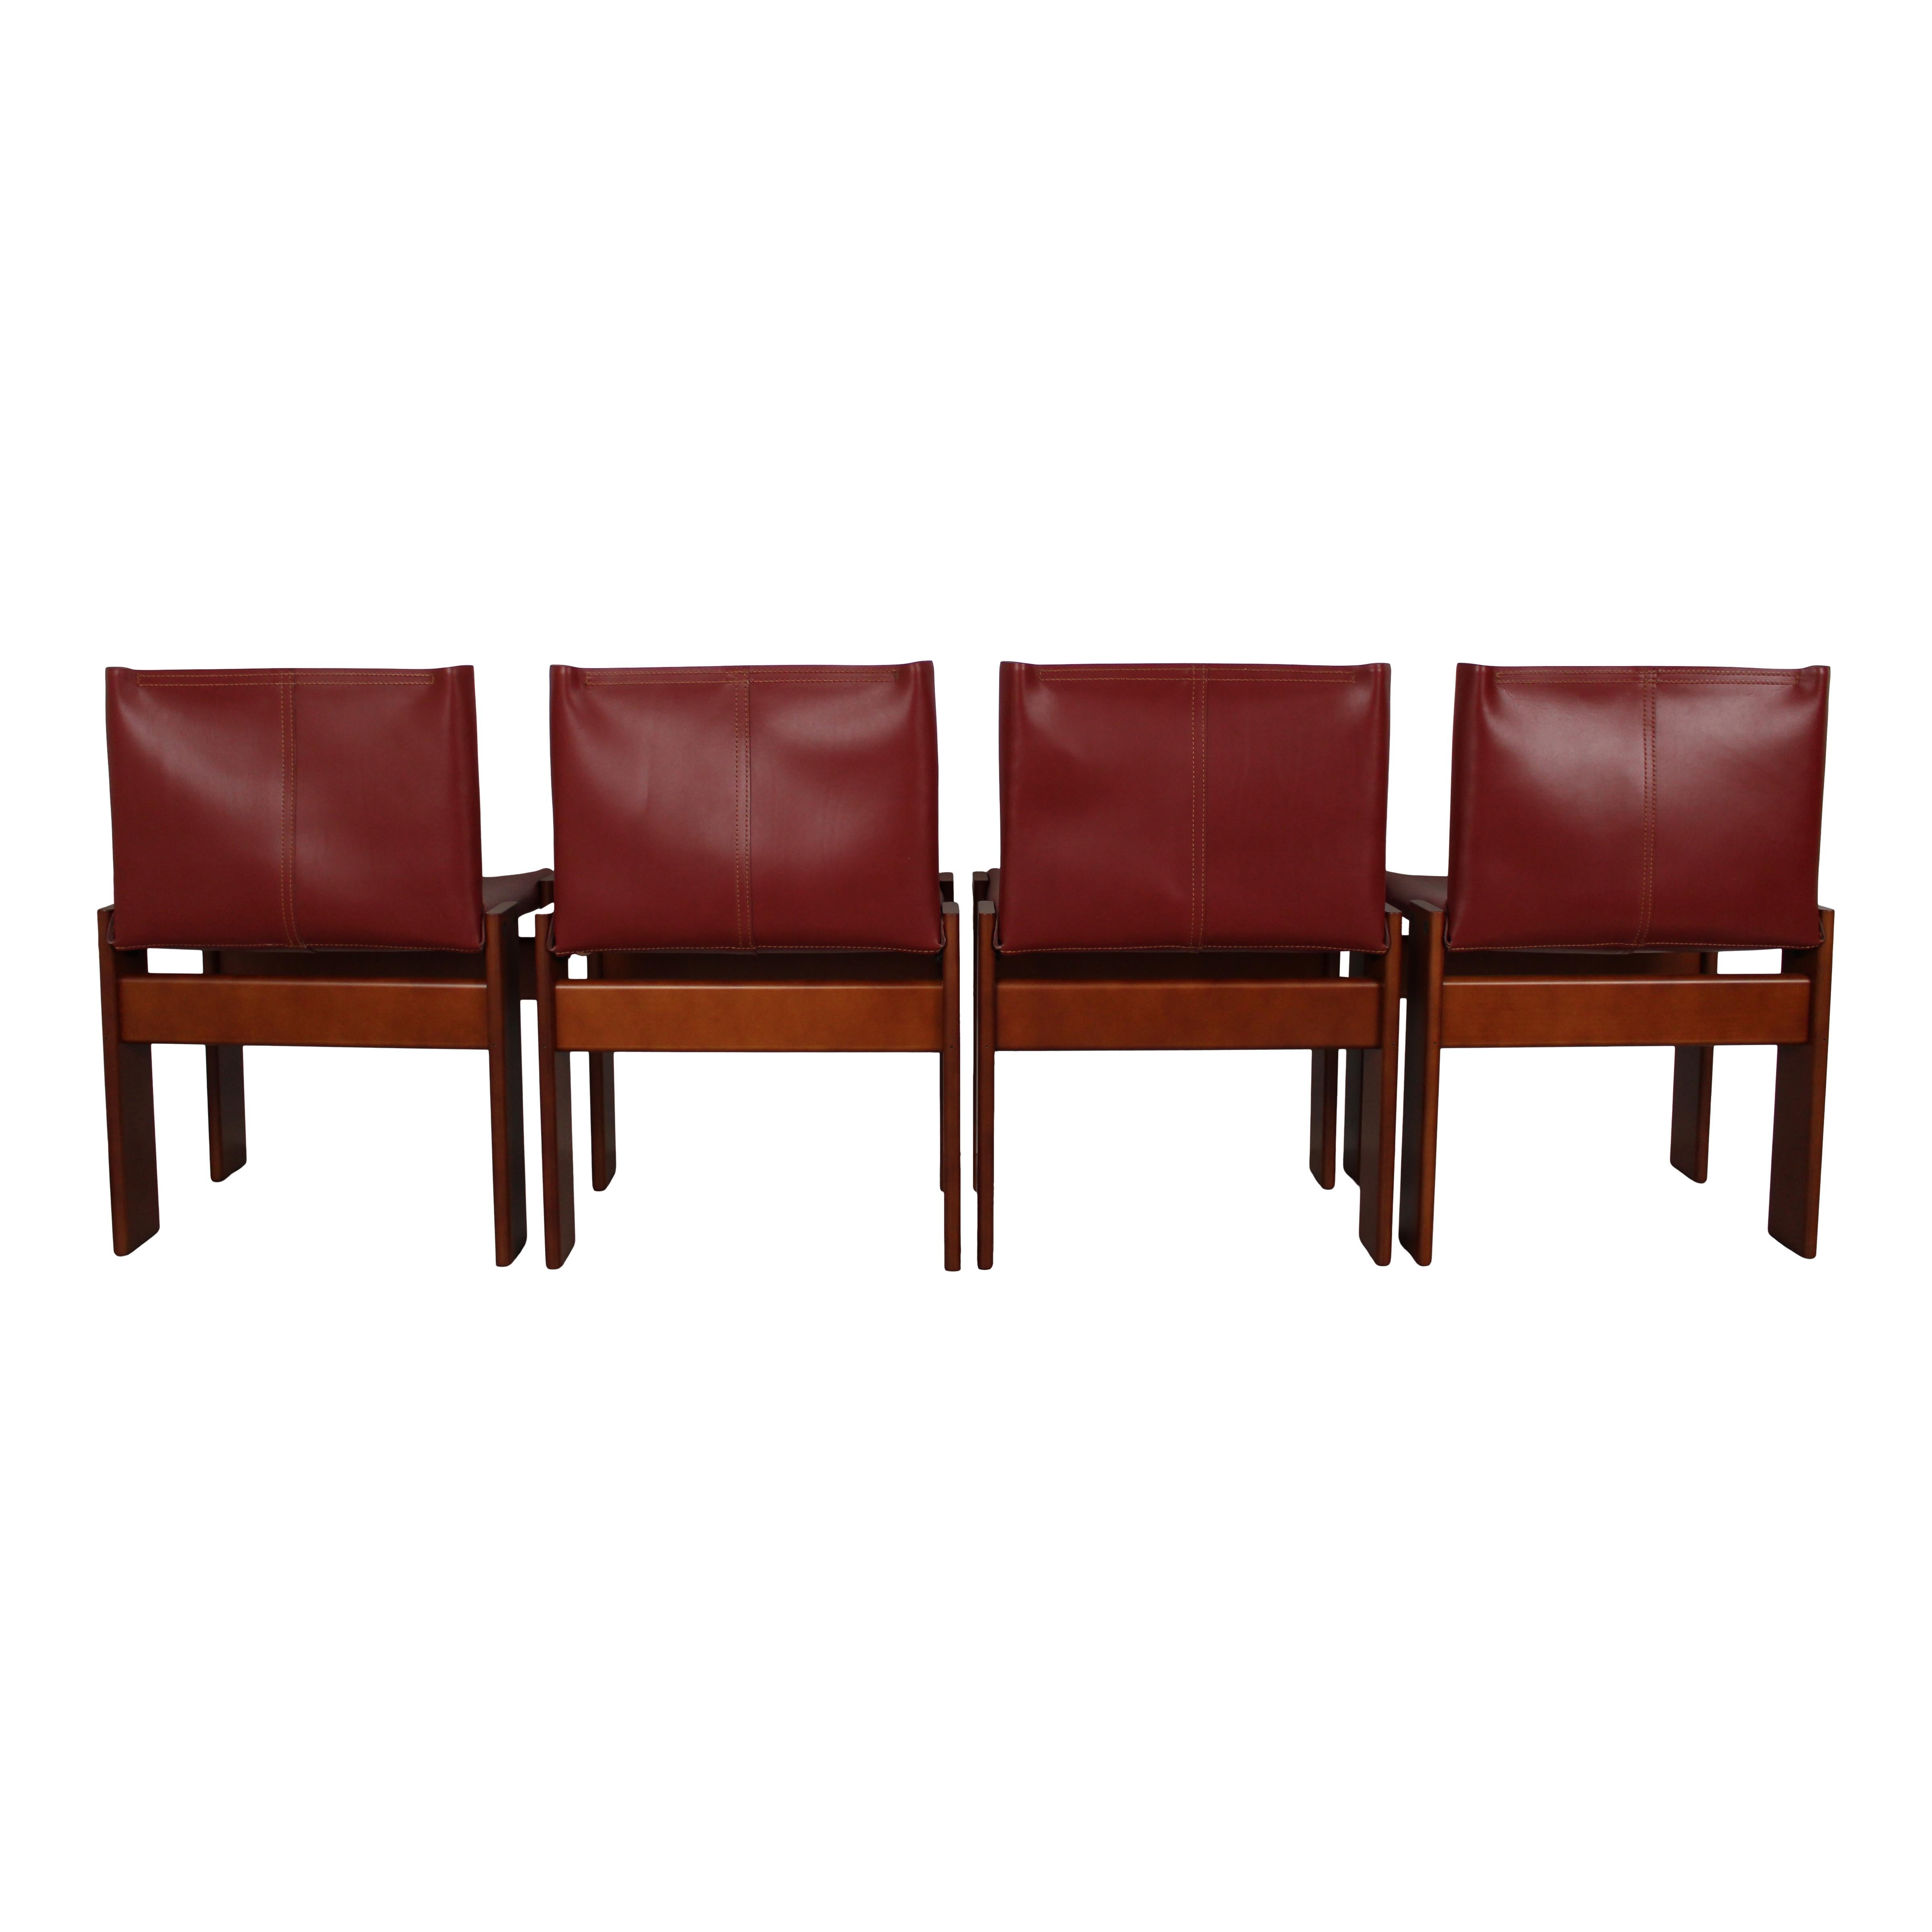 Afra & Tobia Scarpa English Red  Leather Monk Dining Chair for Molteni, Set of 8 For Sale 3